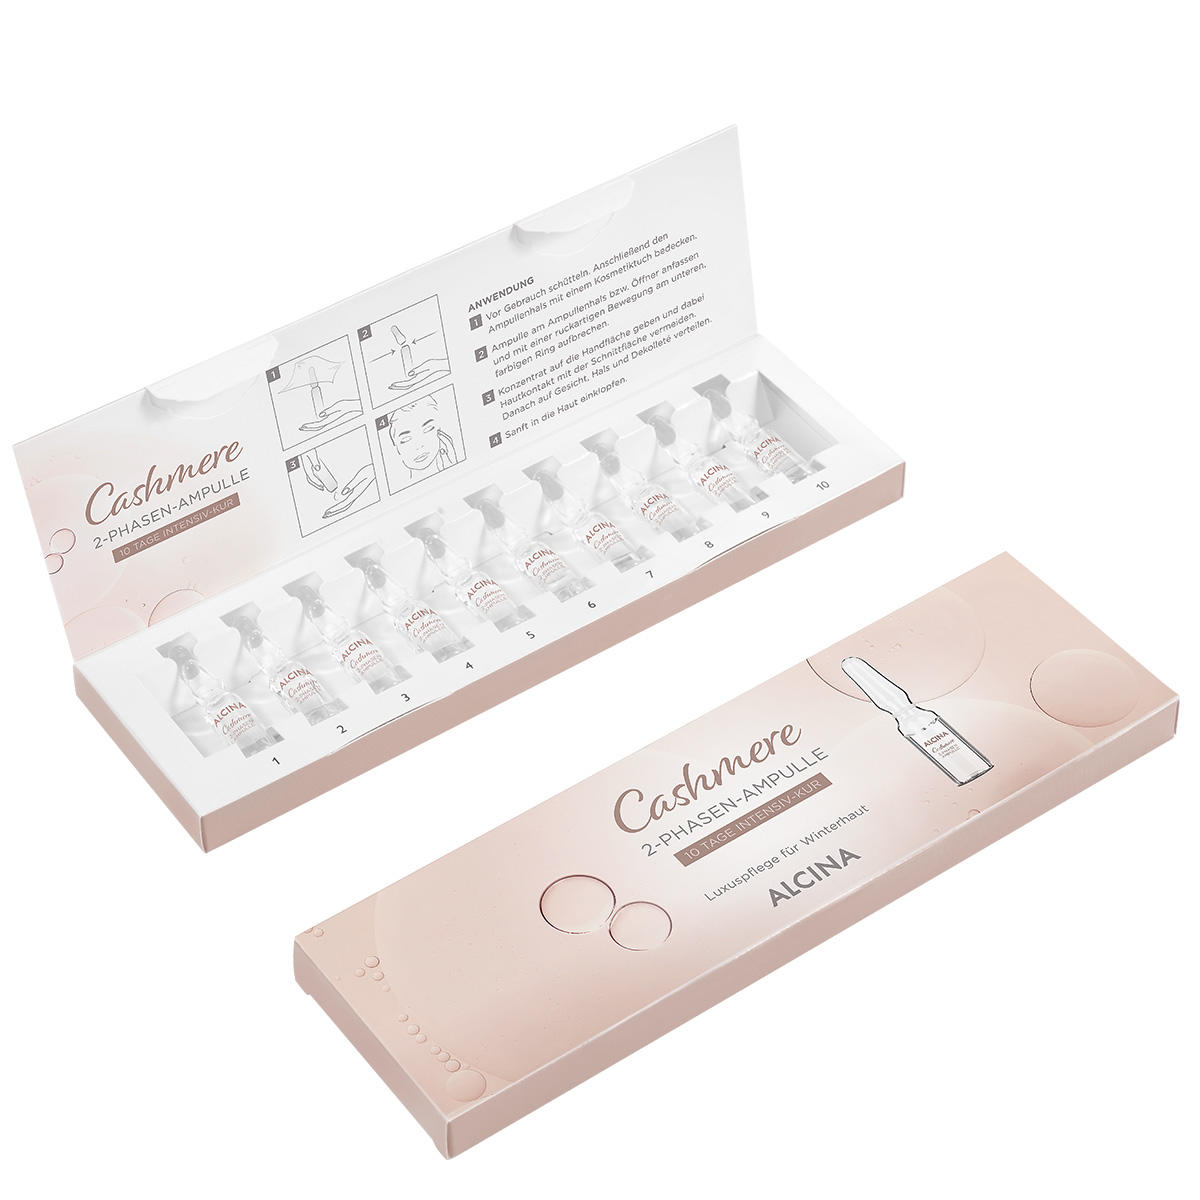 Alcina Cashmere 2-phase ampoule intensive cure 10 x 1 ml - 1